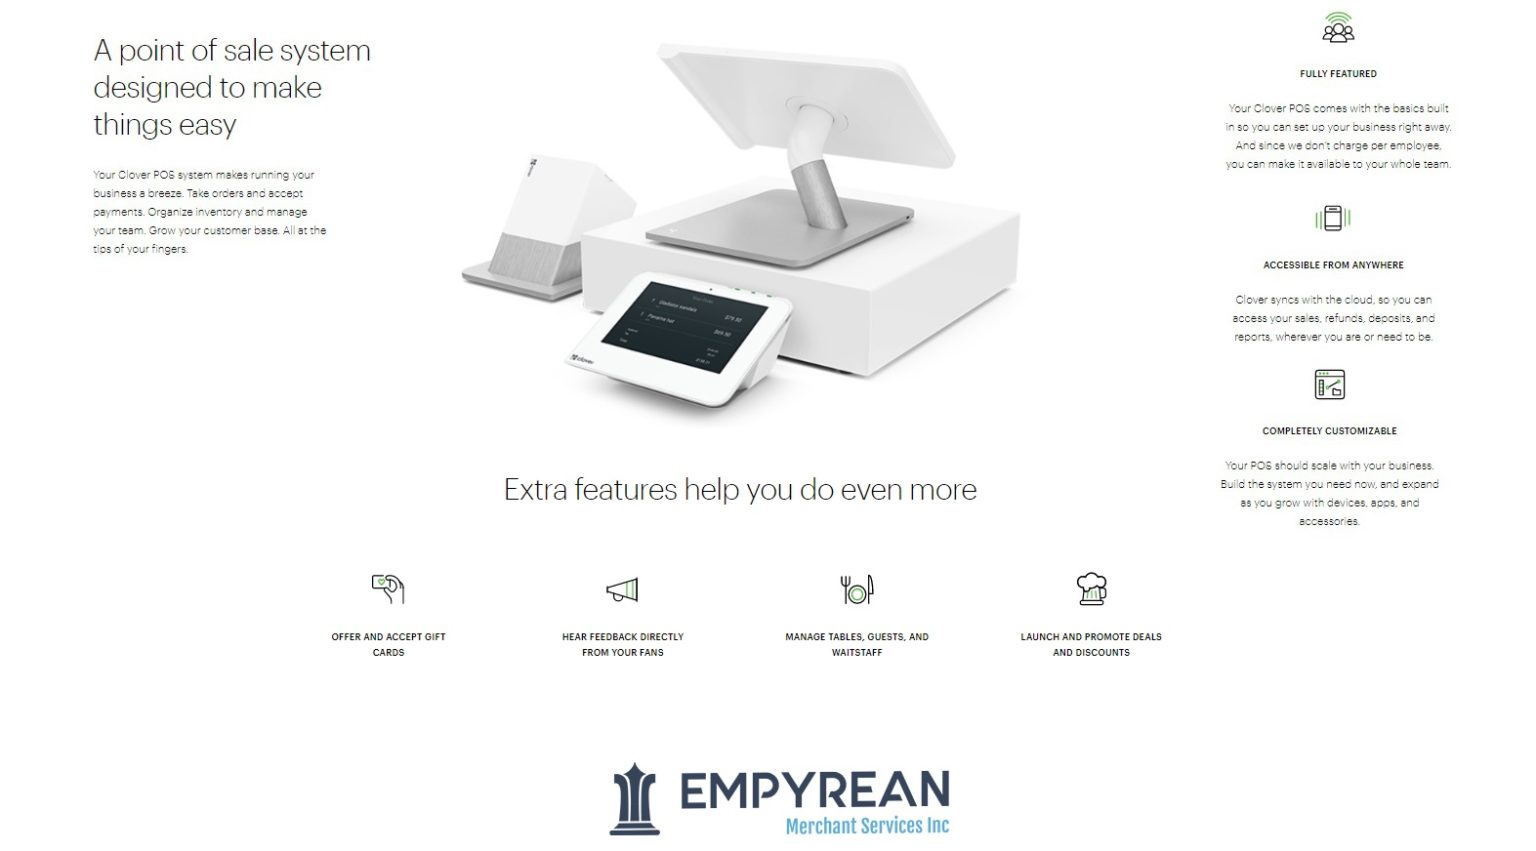 clover mini with cash drawer updated Empyrean Merchant Services